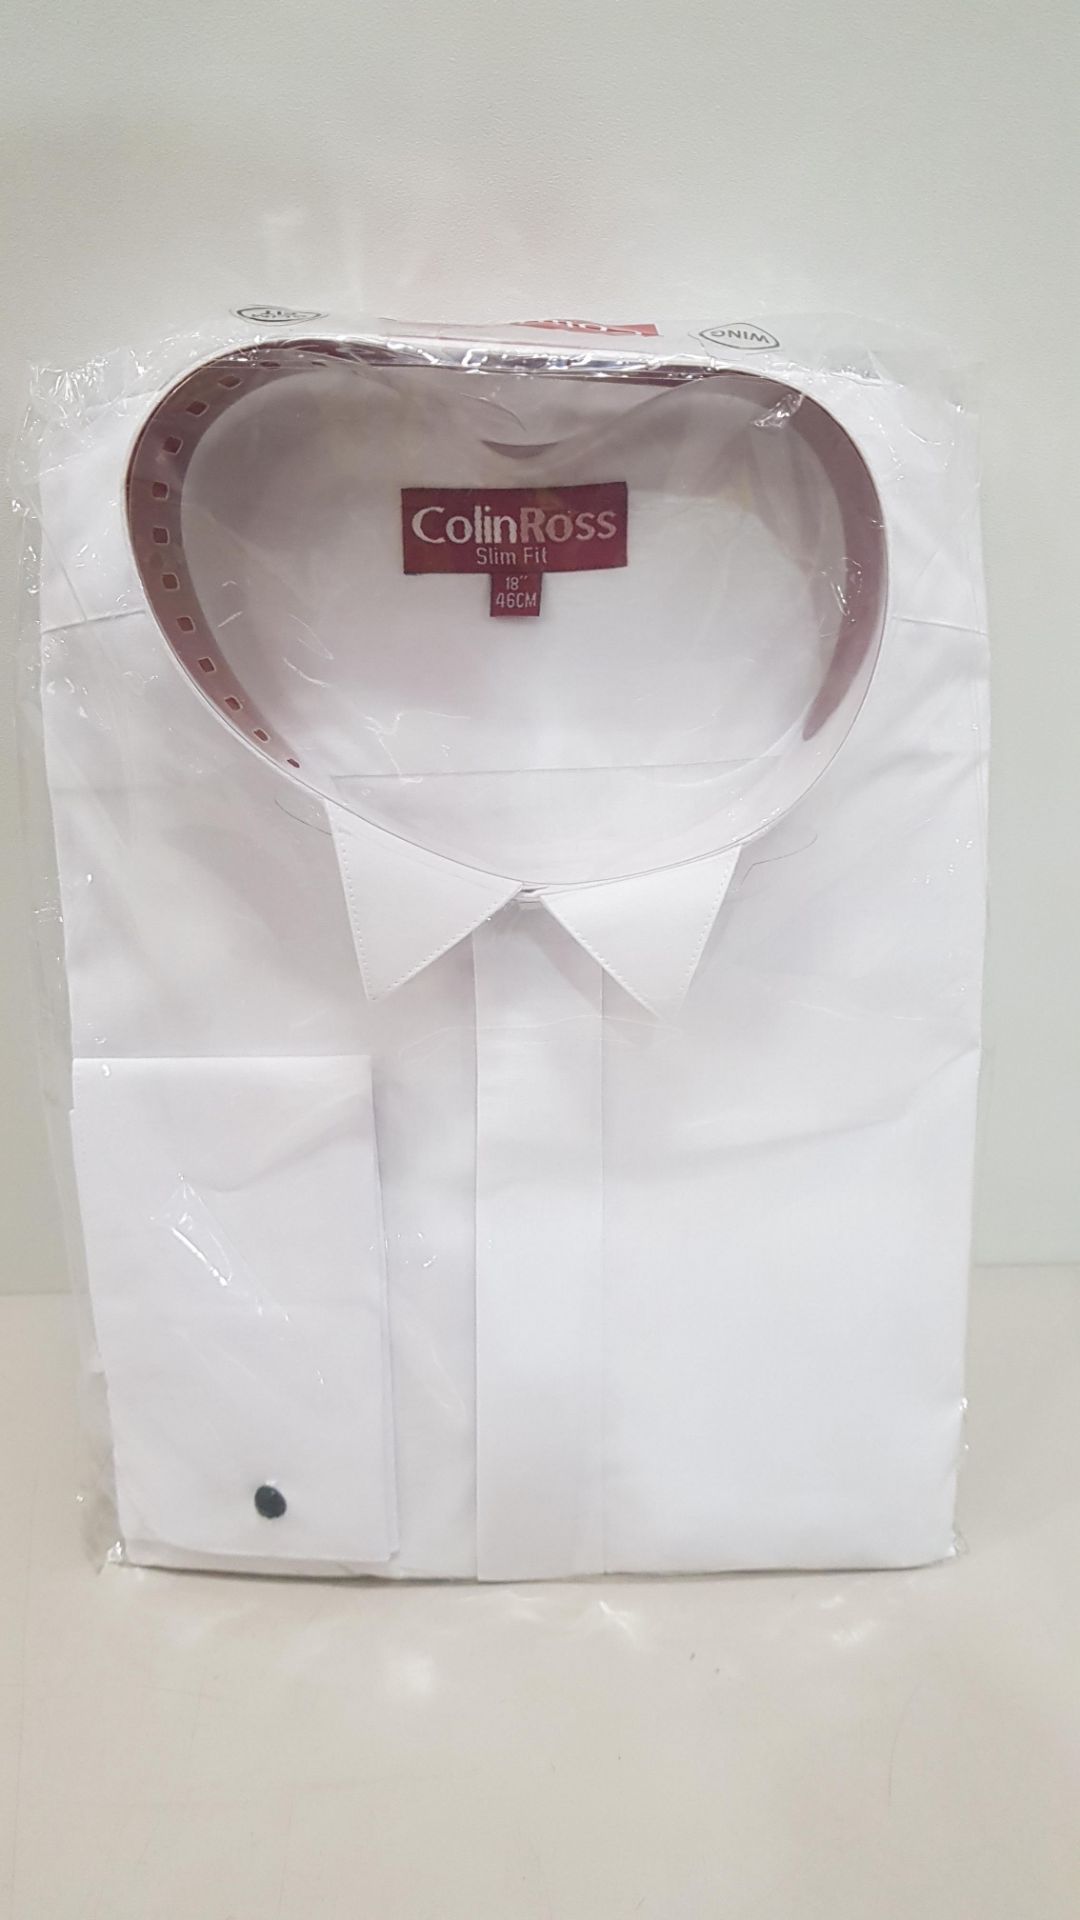 20 X BRAND NEW COLIN ROSS PACKAGED WHITE SHIRTS IN VARIOUS SIZES